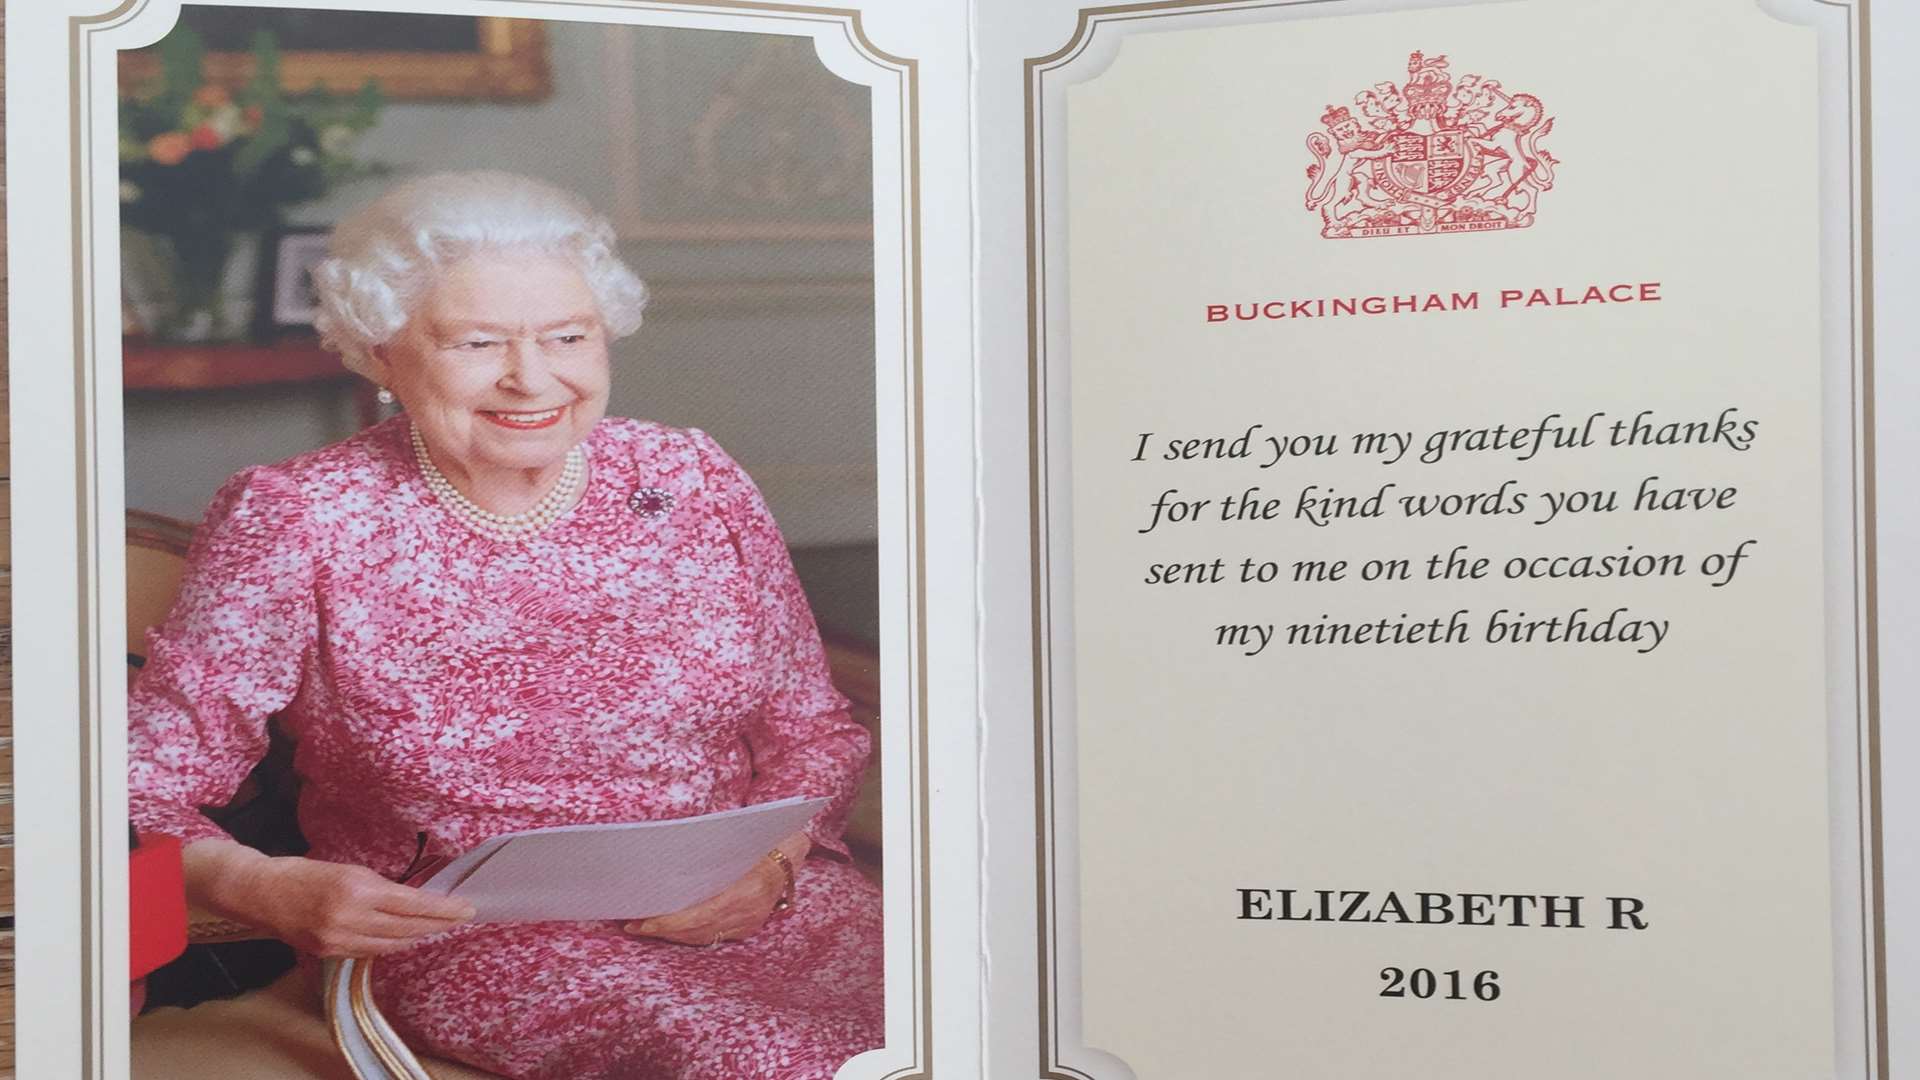 The card from the Queen that came with the letter